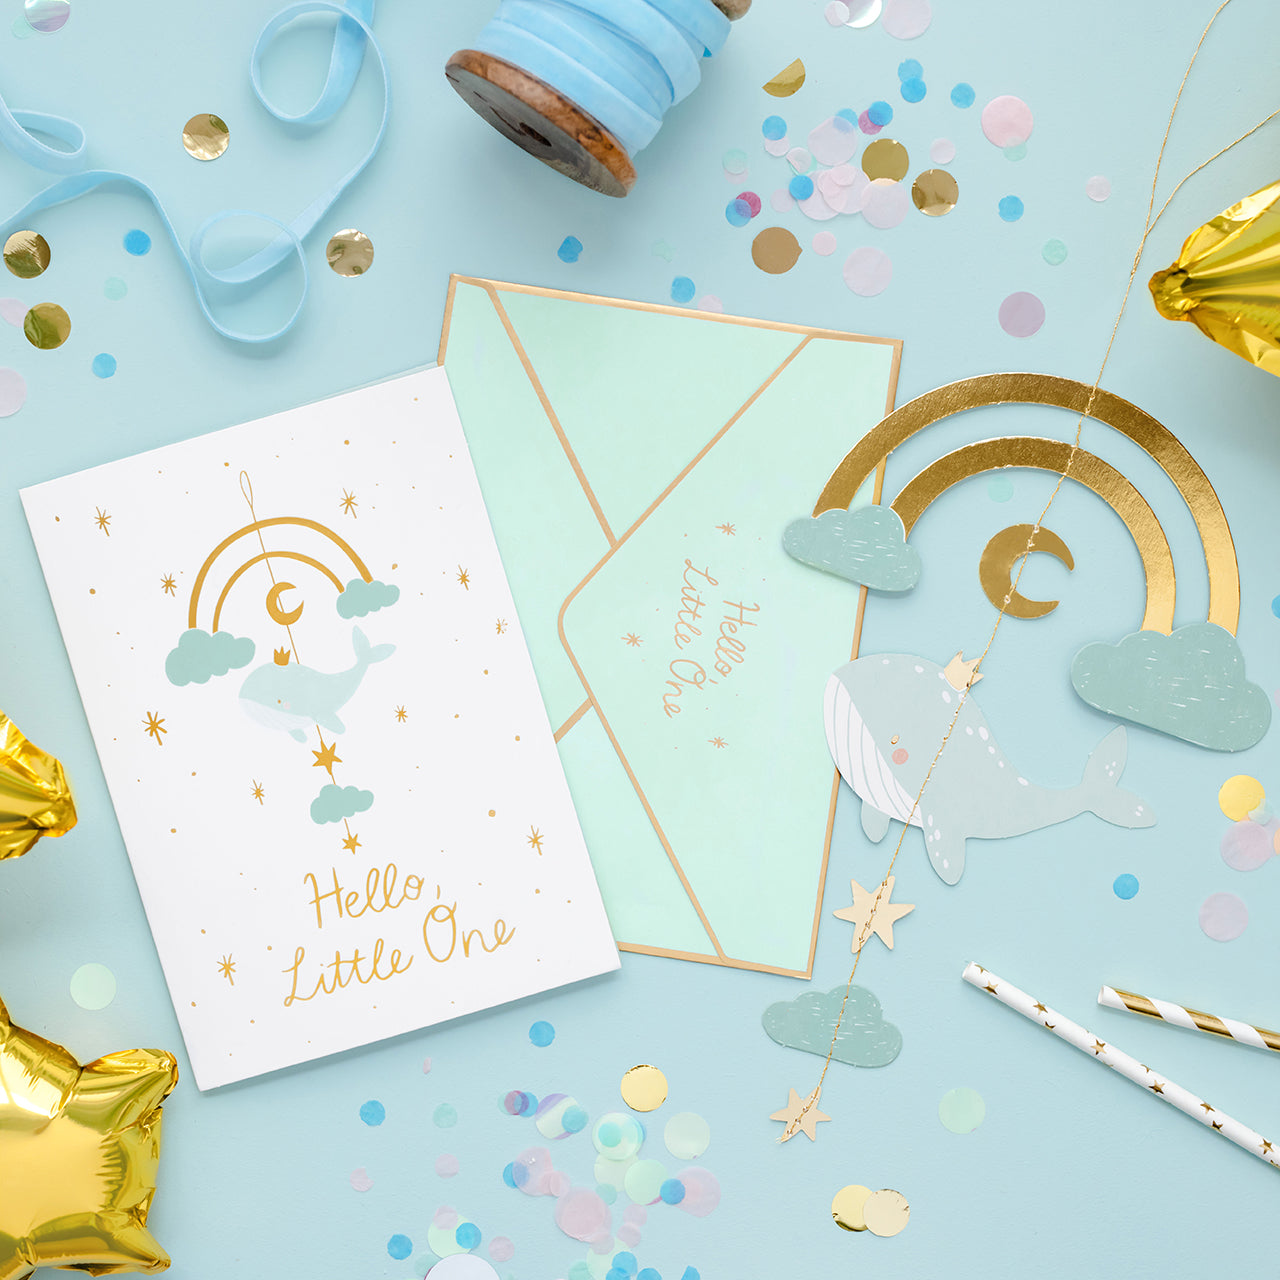 PartyDeco: A card for the birth of a child with a whale pendant